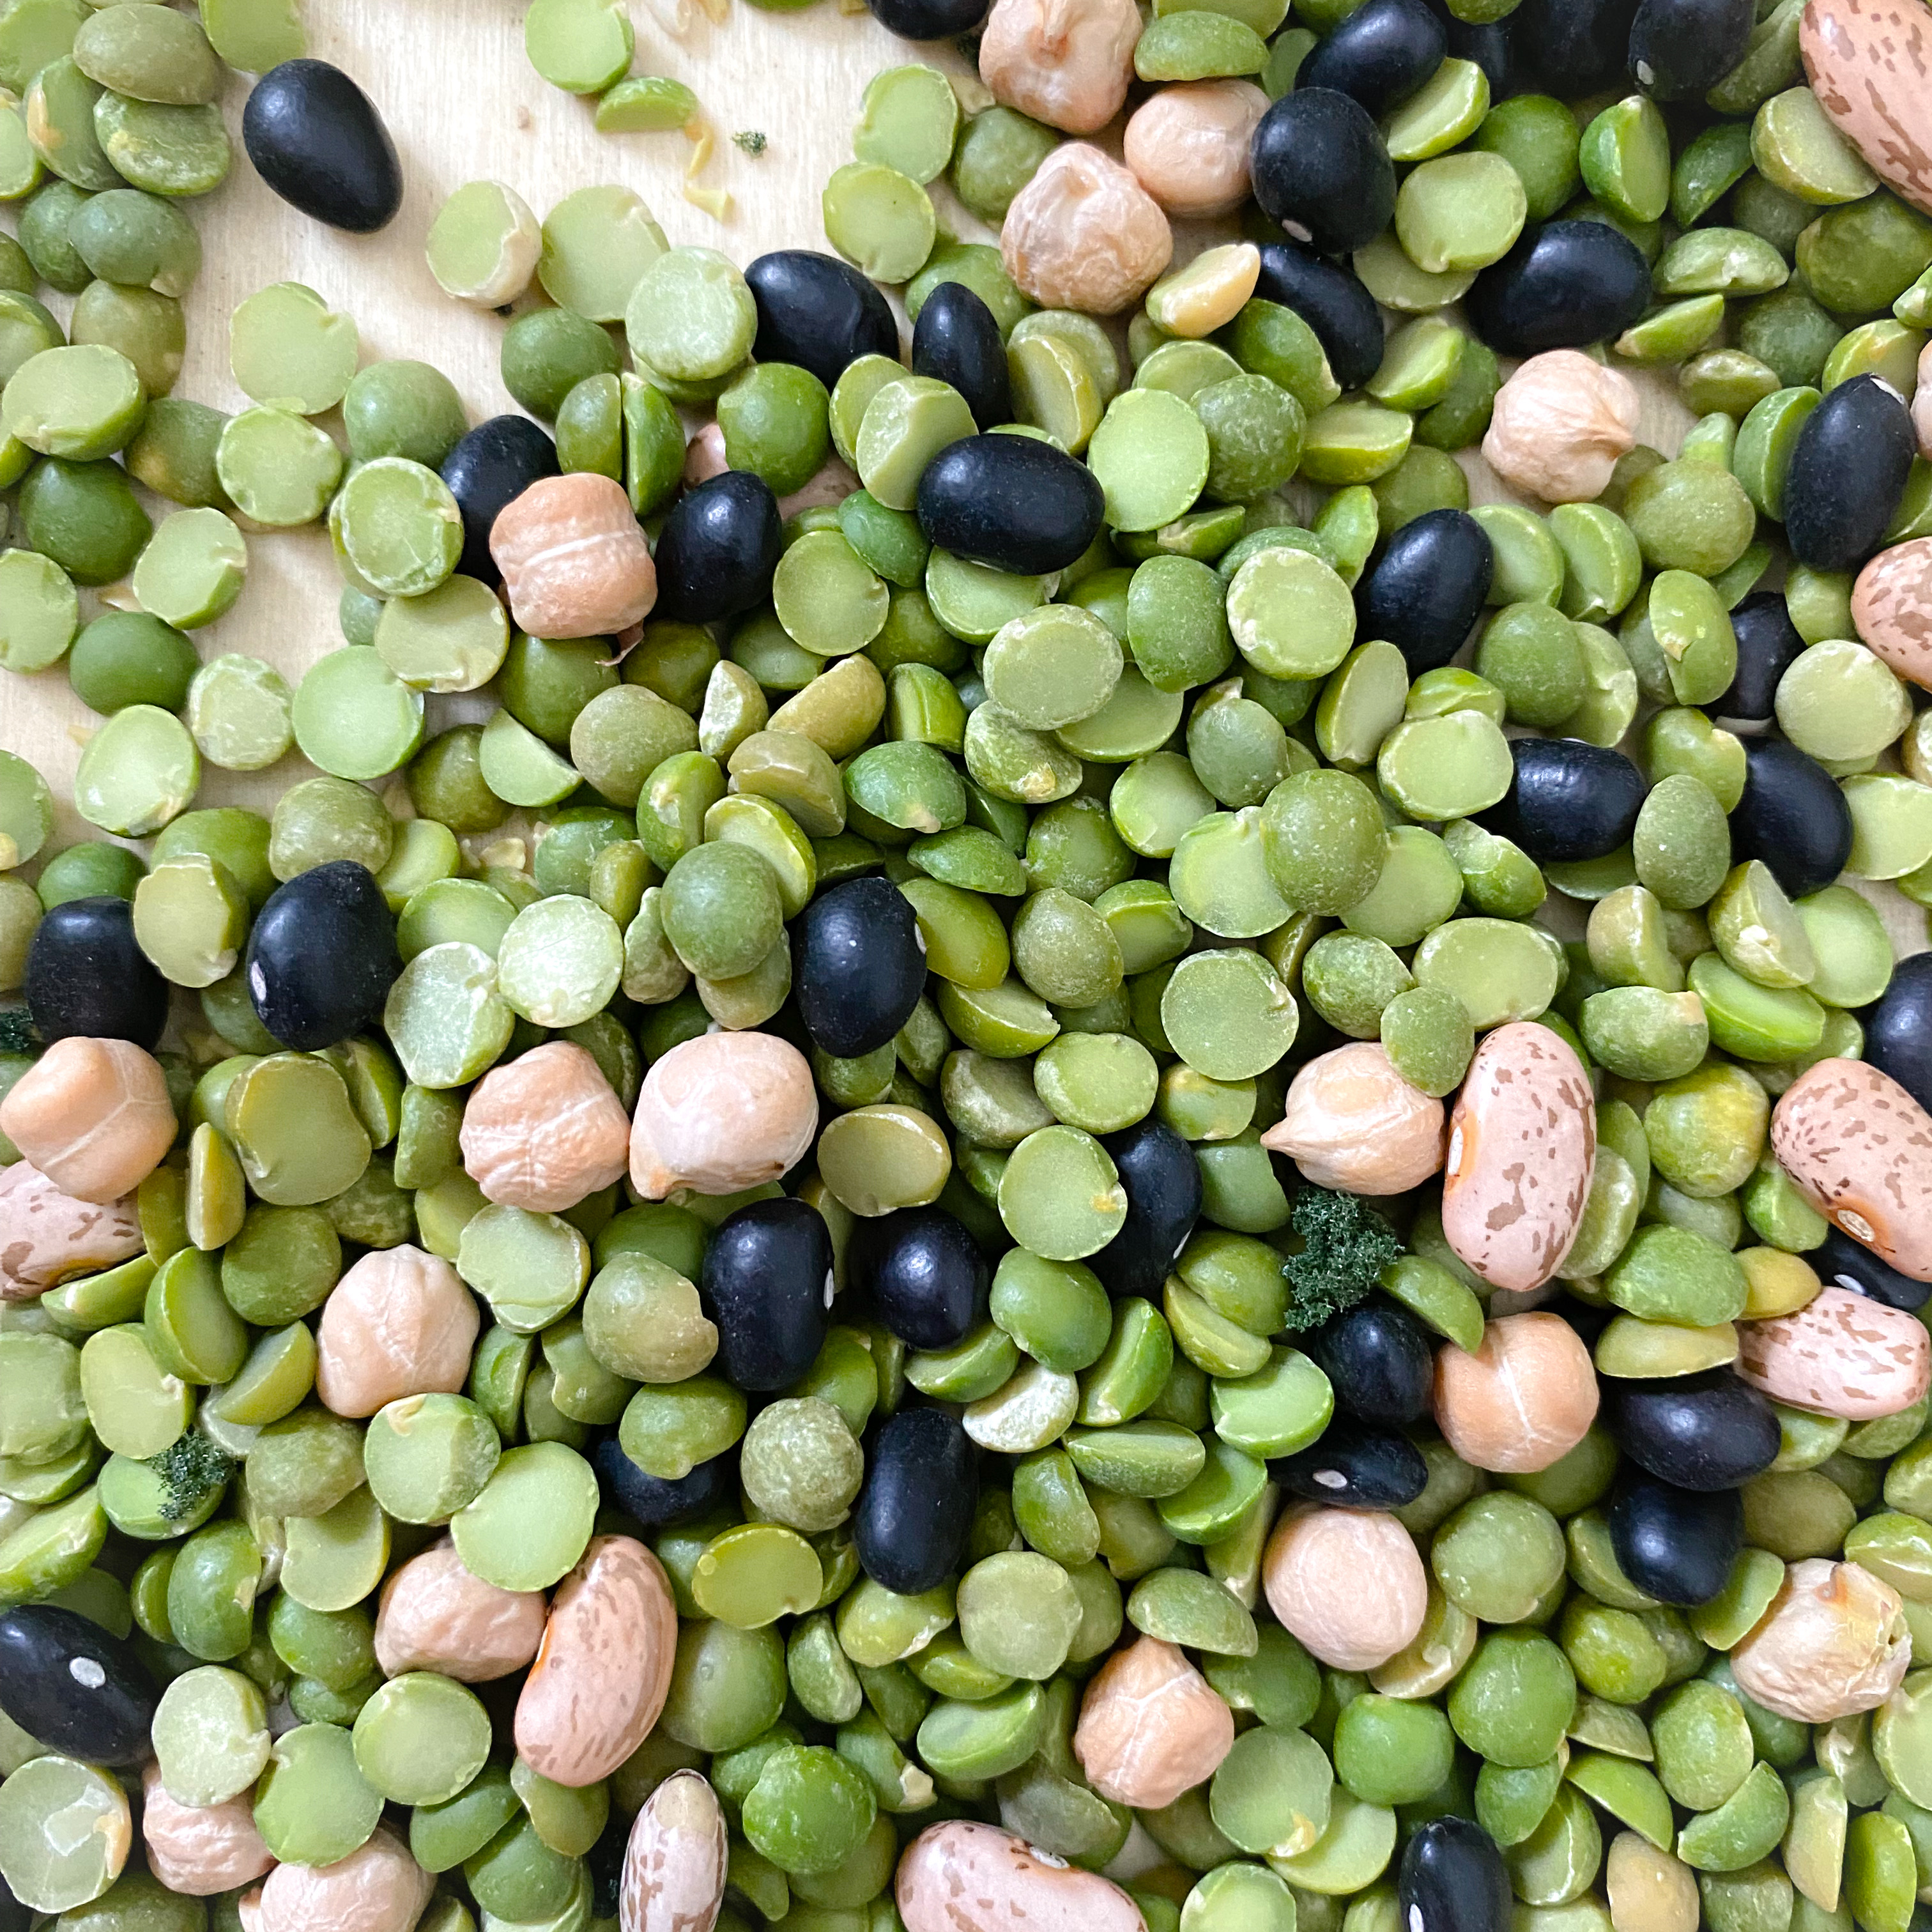 Forest bin filler: primarily green split peas with scattered black, pinto and garbanzo beans.